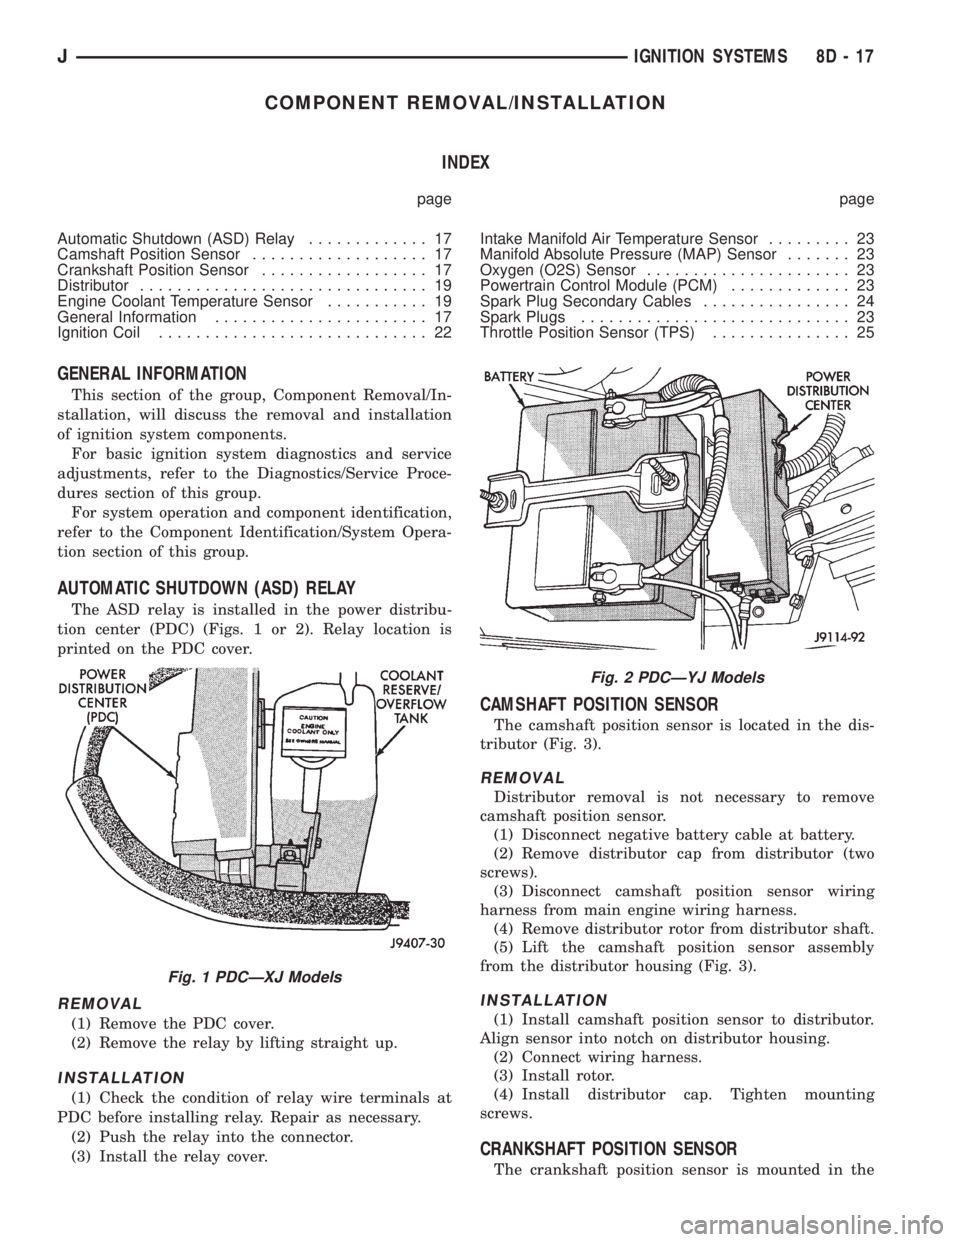 JEEP YJ 1995  Service And Repair Manual COMPONENT REMOVAL/INSTALLATION
INDEX
page page
Automatic Shutdown (ASD) Relay............. 17
Camshaft Position Sensor................... 17
Crankshaft Position Sensor.................. 17
Distributor